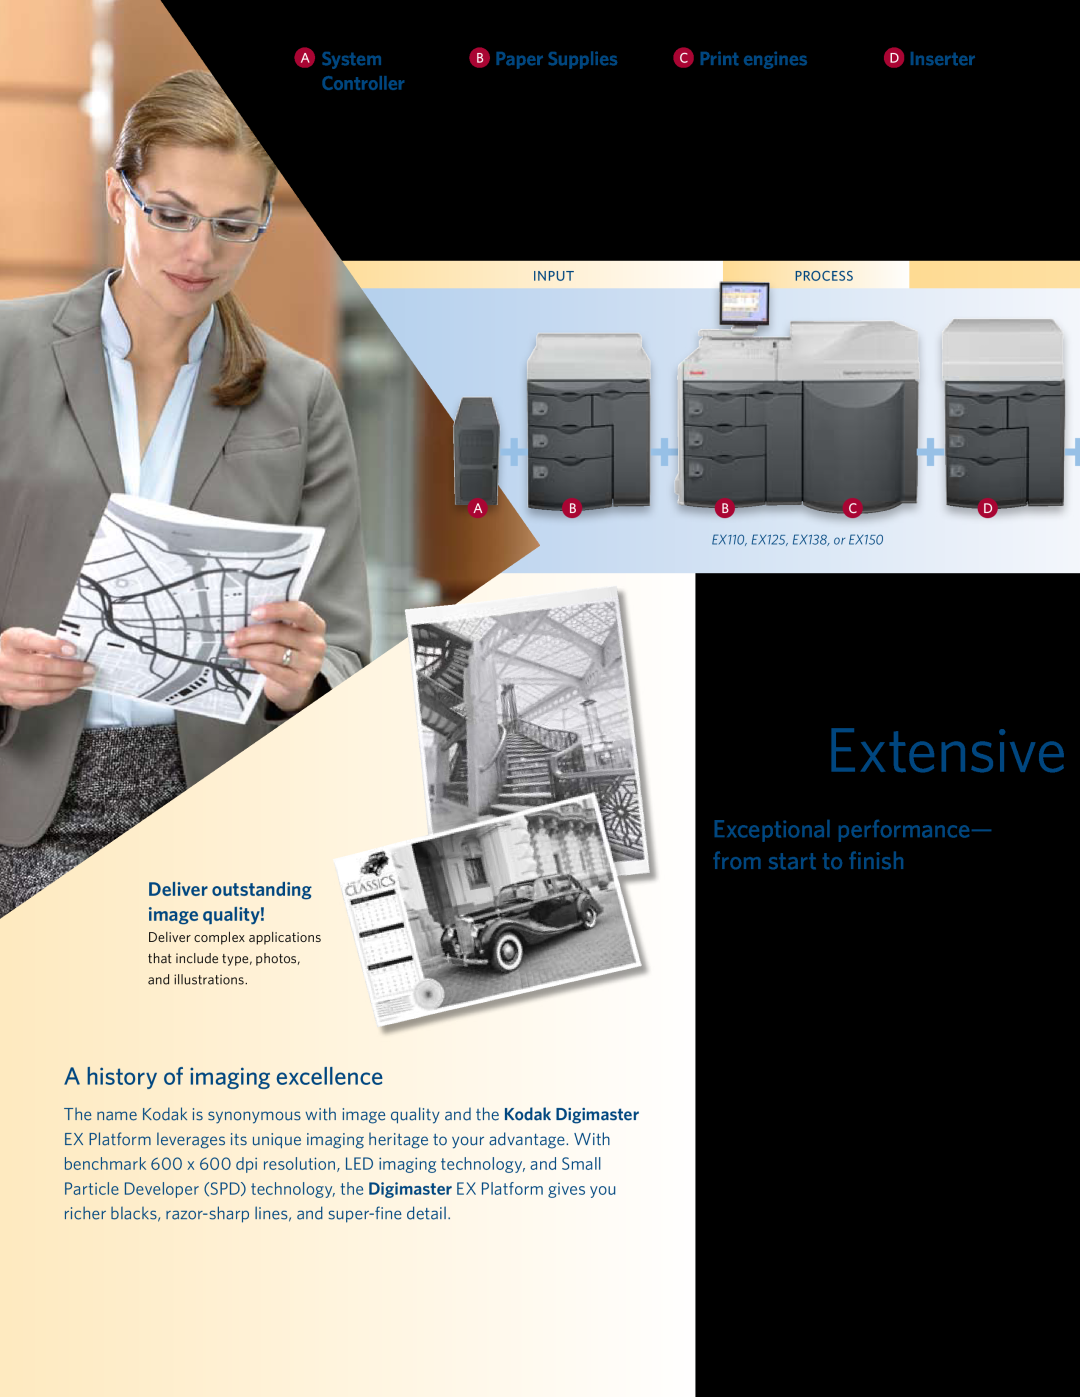 Kodak All in One Printer Extensive, A history of imaging excellence, Exceptional performance- from start to finish, Input 